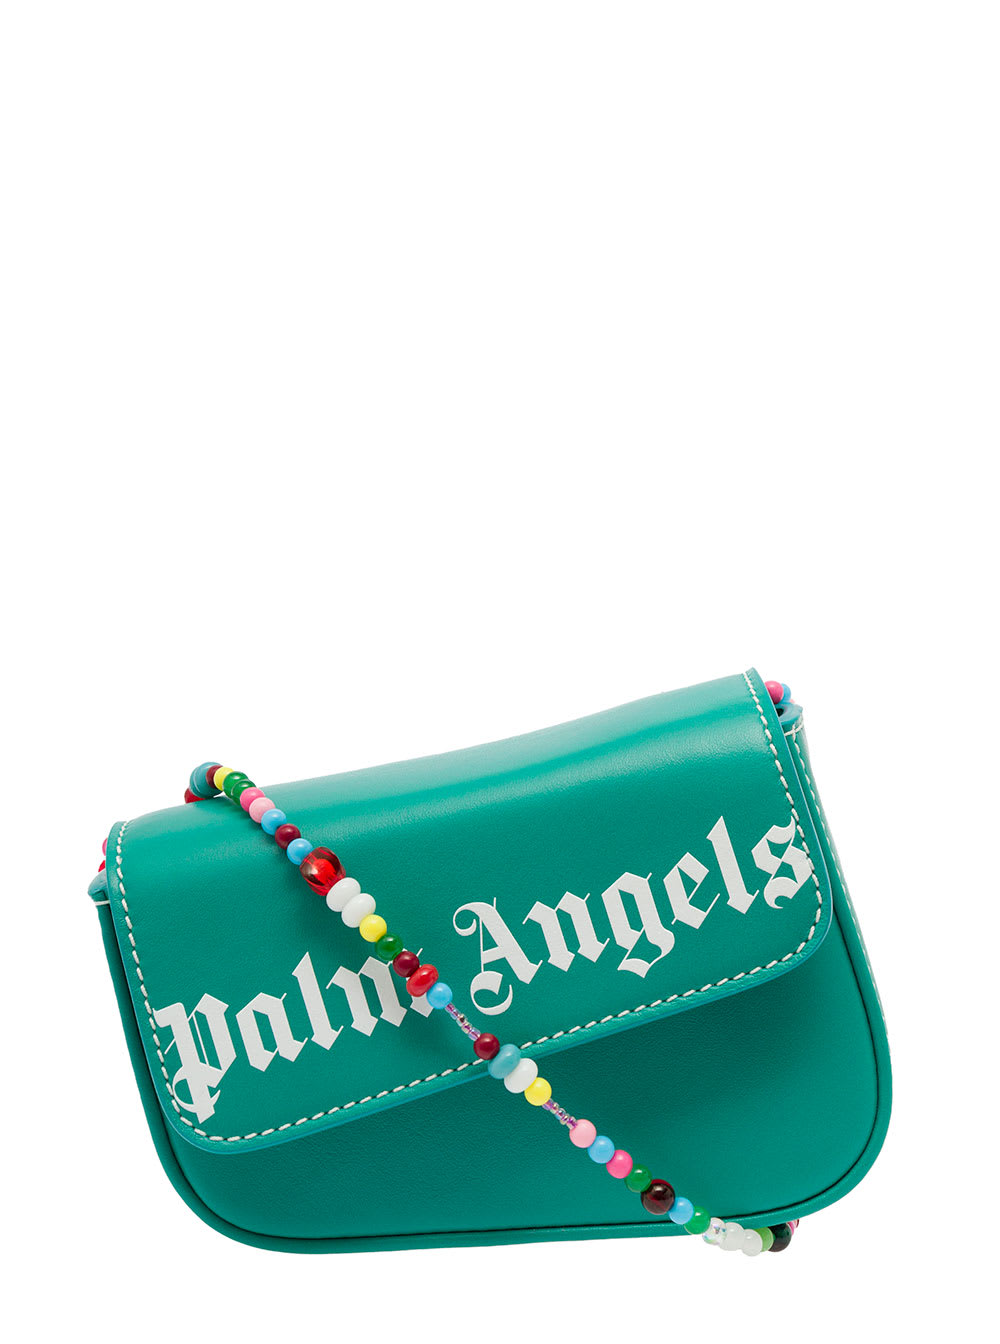 Palm Angels Palma Angels Womans Green Leather Crossbody Bag With Beads